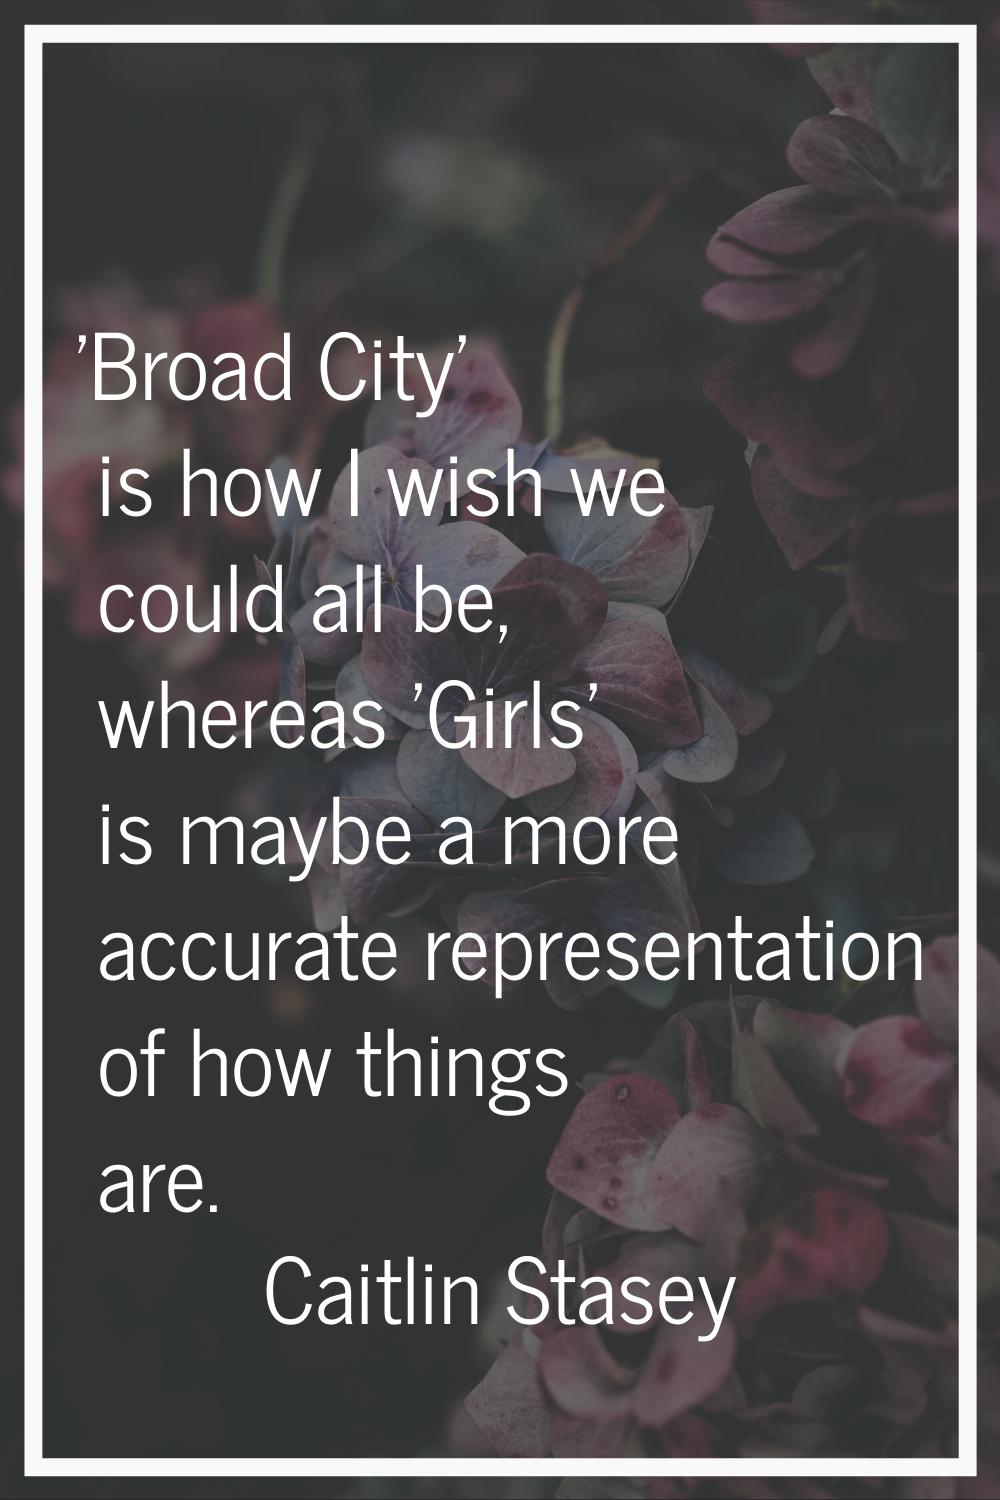 'Broad City' is how I wish we could all be, whereas 'Girls' is maybe a more accurate representation